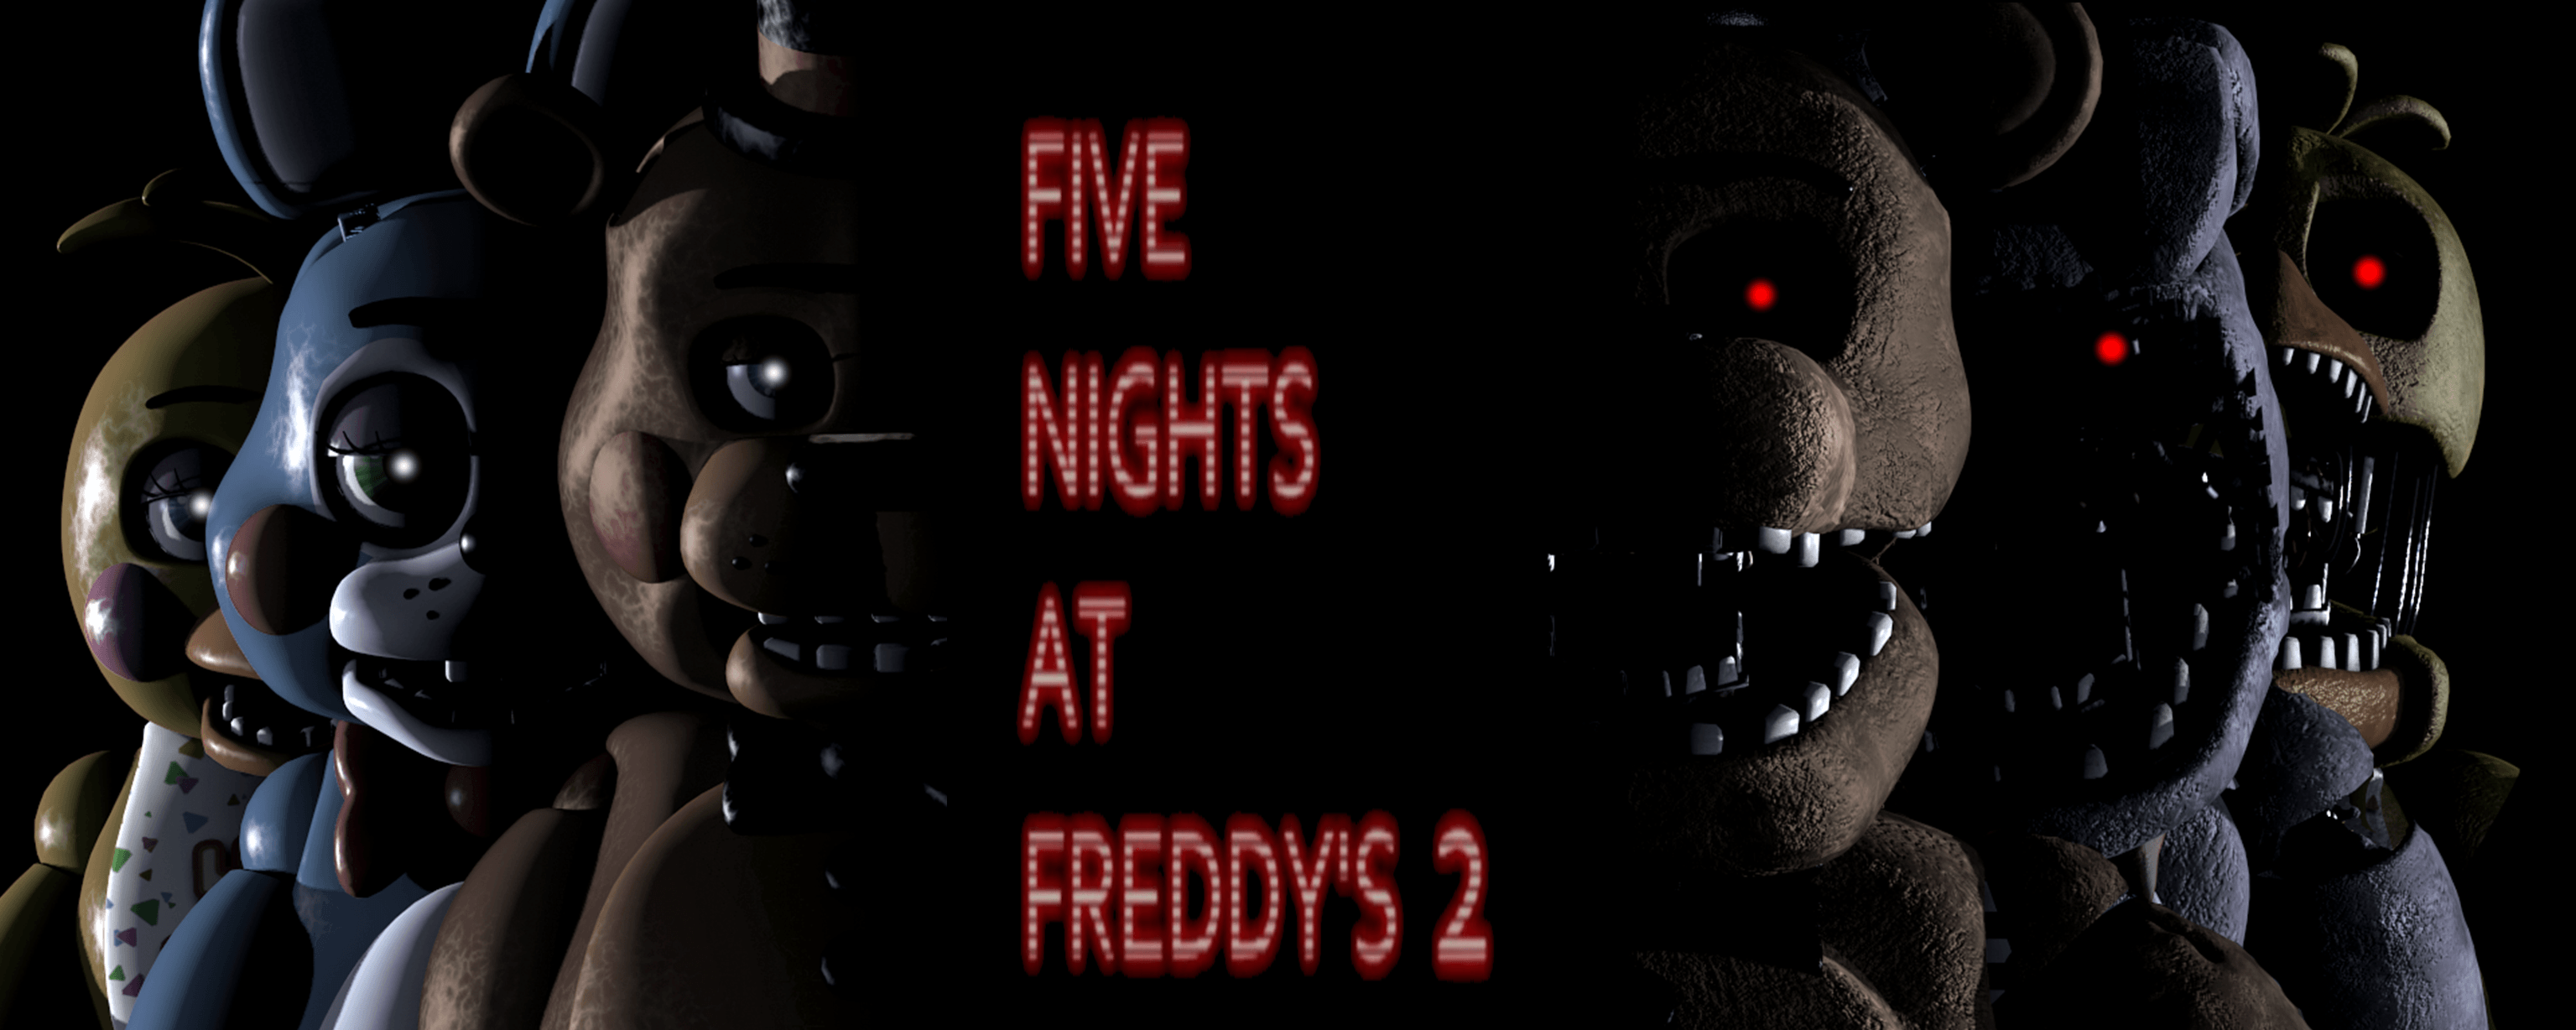 Five Nights At Freddy's 2 Wallpaper By Elsa Shadow